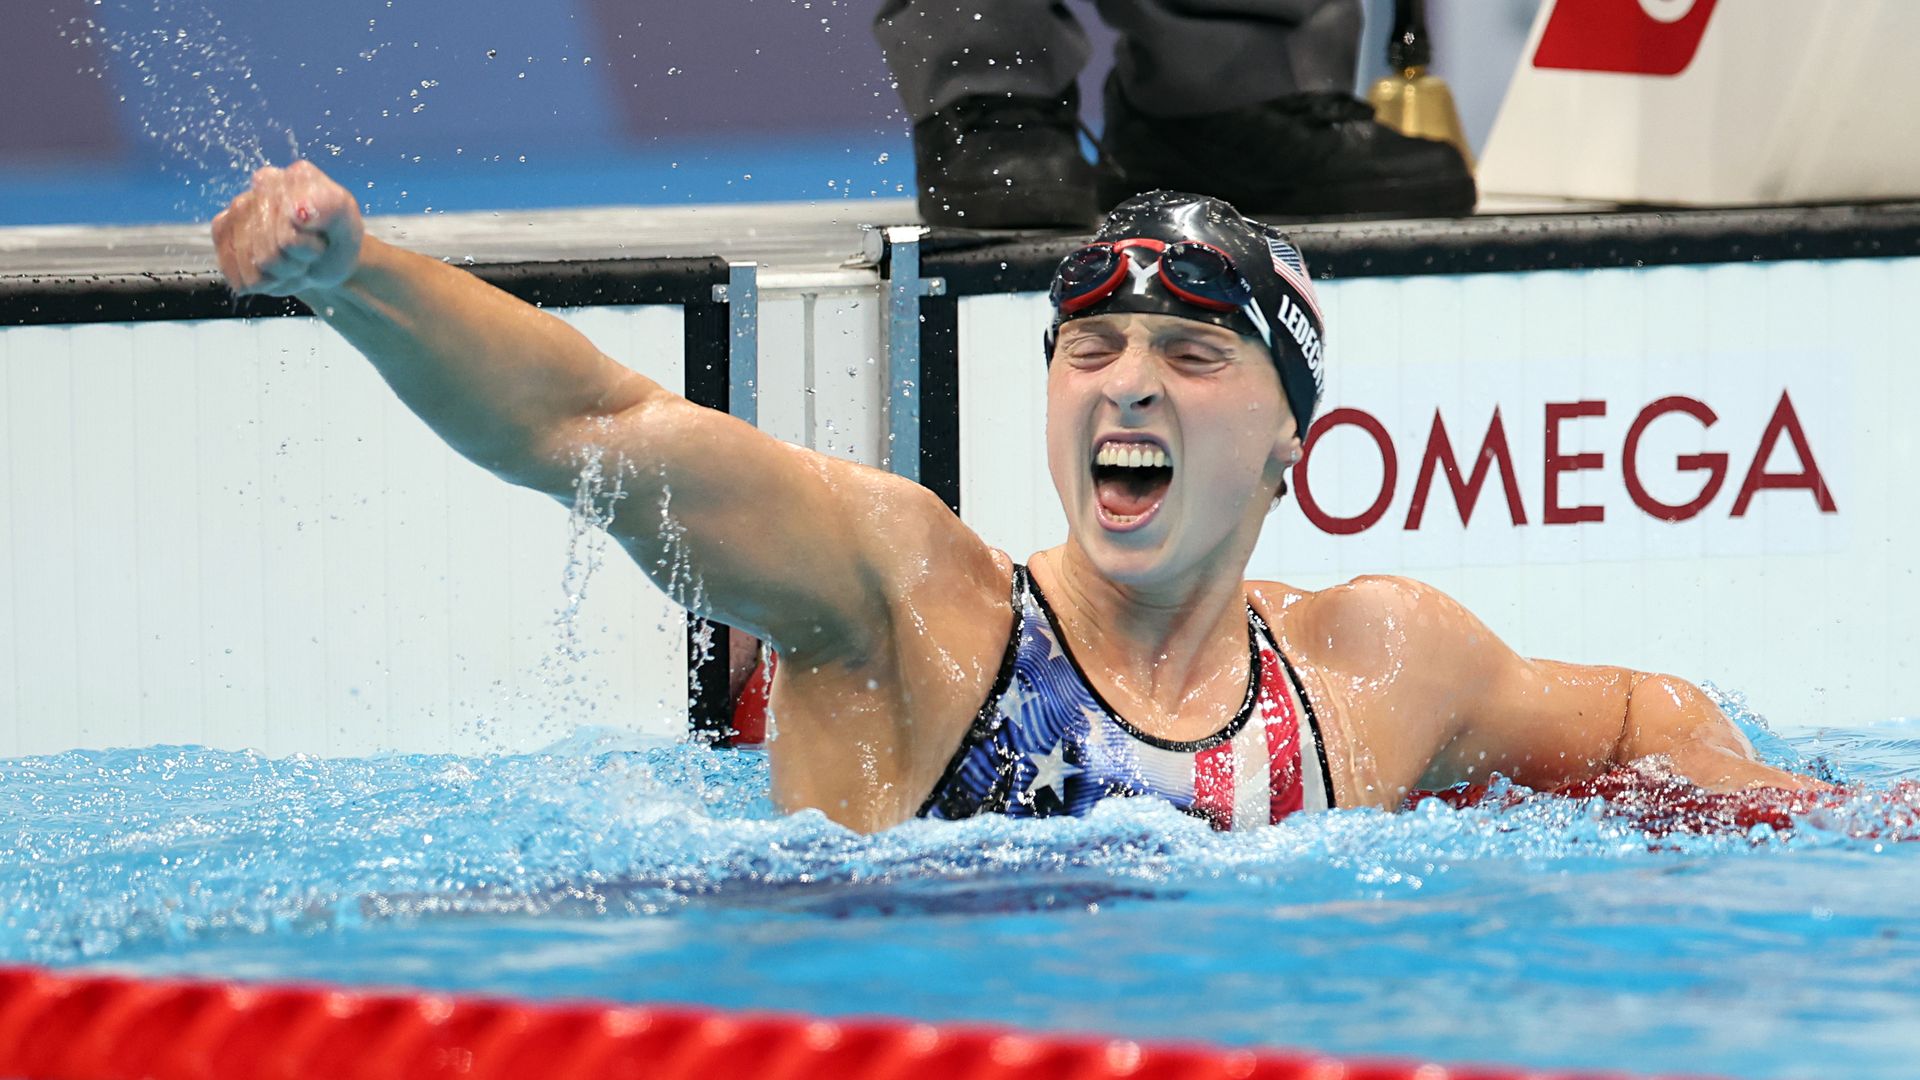 Katie Ledecky of Team USA celebrates after winning the Women’s 1,500m Freestyle Final on day five of the Tokyo 2020 Olympic Games at Tokyo Aquatics Centre in Japan